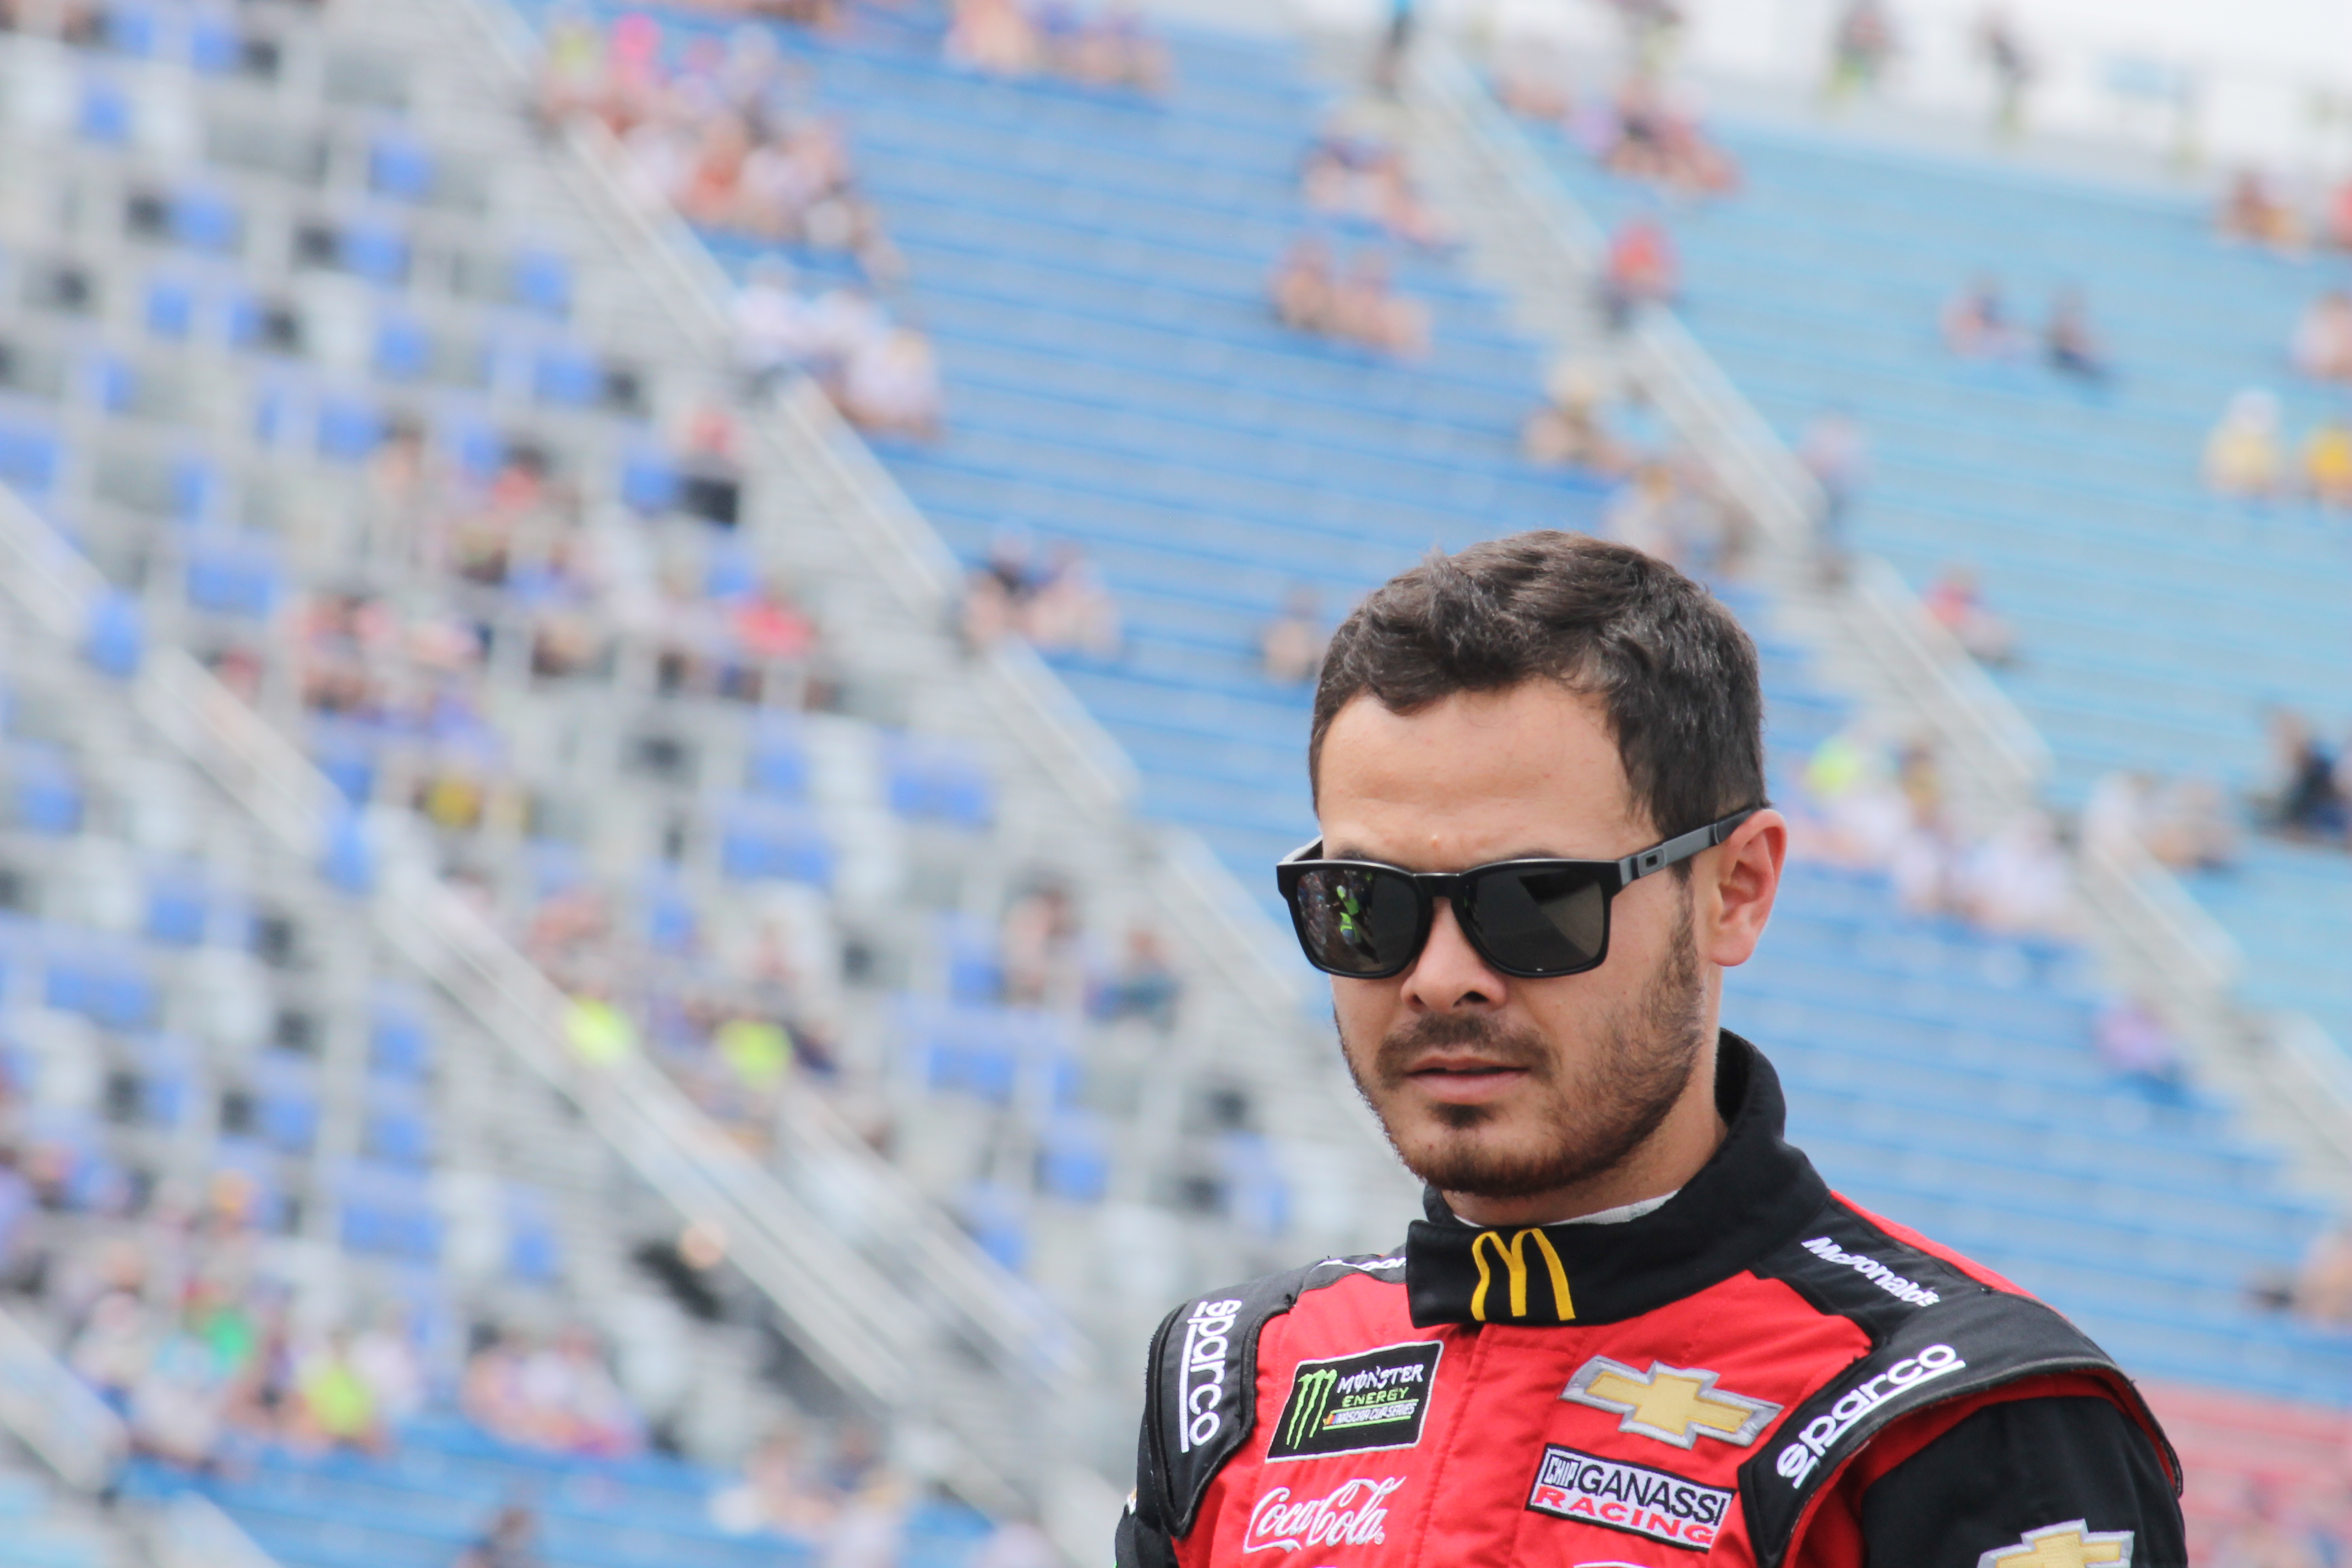 In any event, Larson realizes his best shot for wins presides at Michigan and Bristol. (Photo Credit: Matteo Marcheschi/TPF)